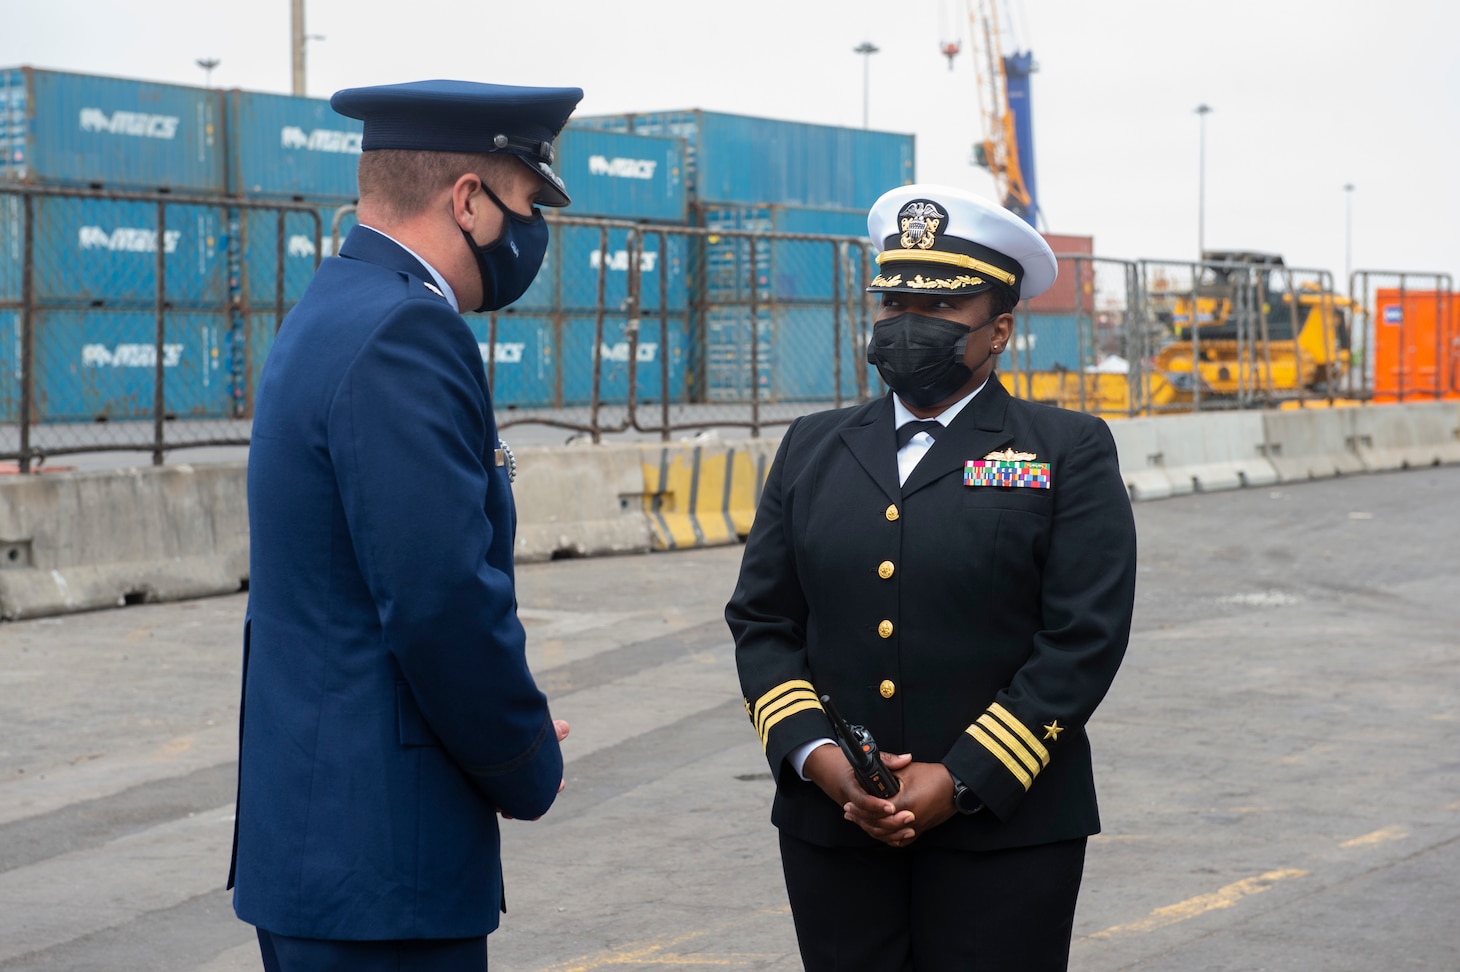 Cmdr. Ernique Sesler, executive officer, USS Hershel "Woody" Williams, right, speaks with Lt. Col. William Lange, defense attache, U.S. embassy in Windhoek, Namibia, before a tour of the Expeditionary Sea Base USS Hershel "Woody" Williams (ESB 4), Sept. 17, 2021.